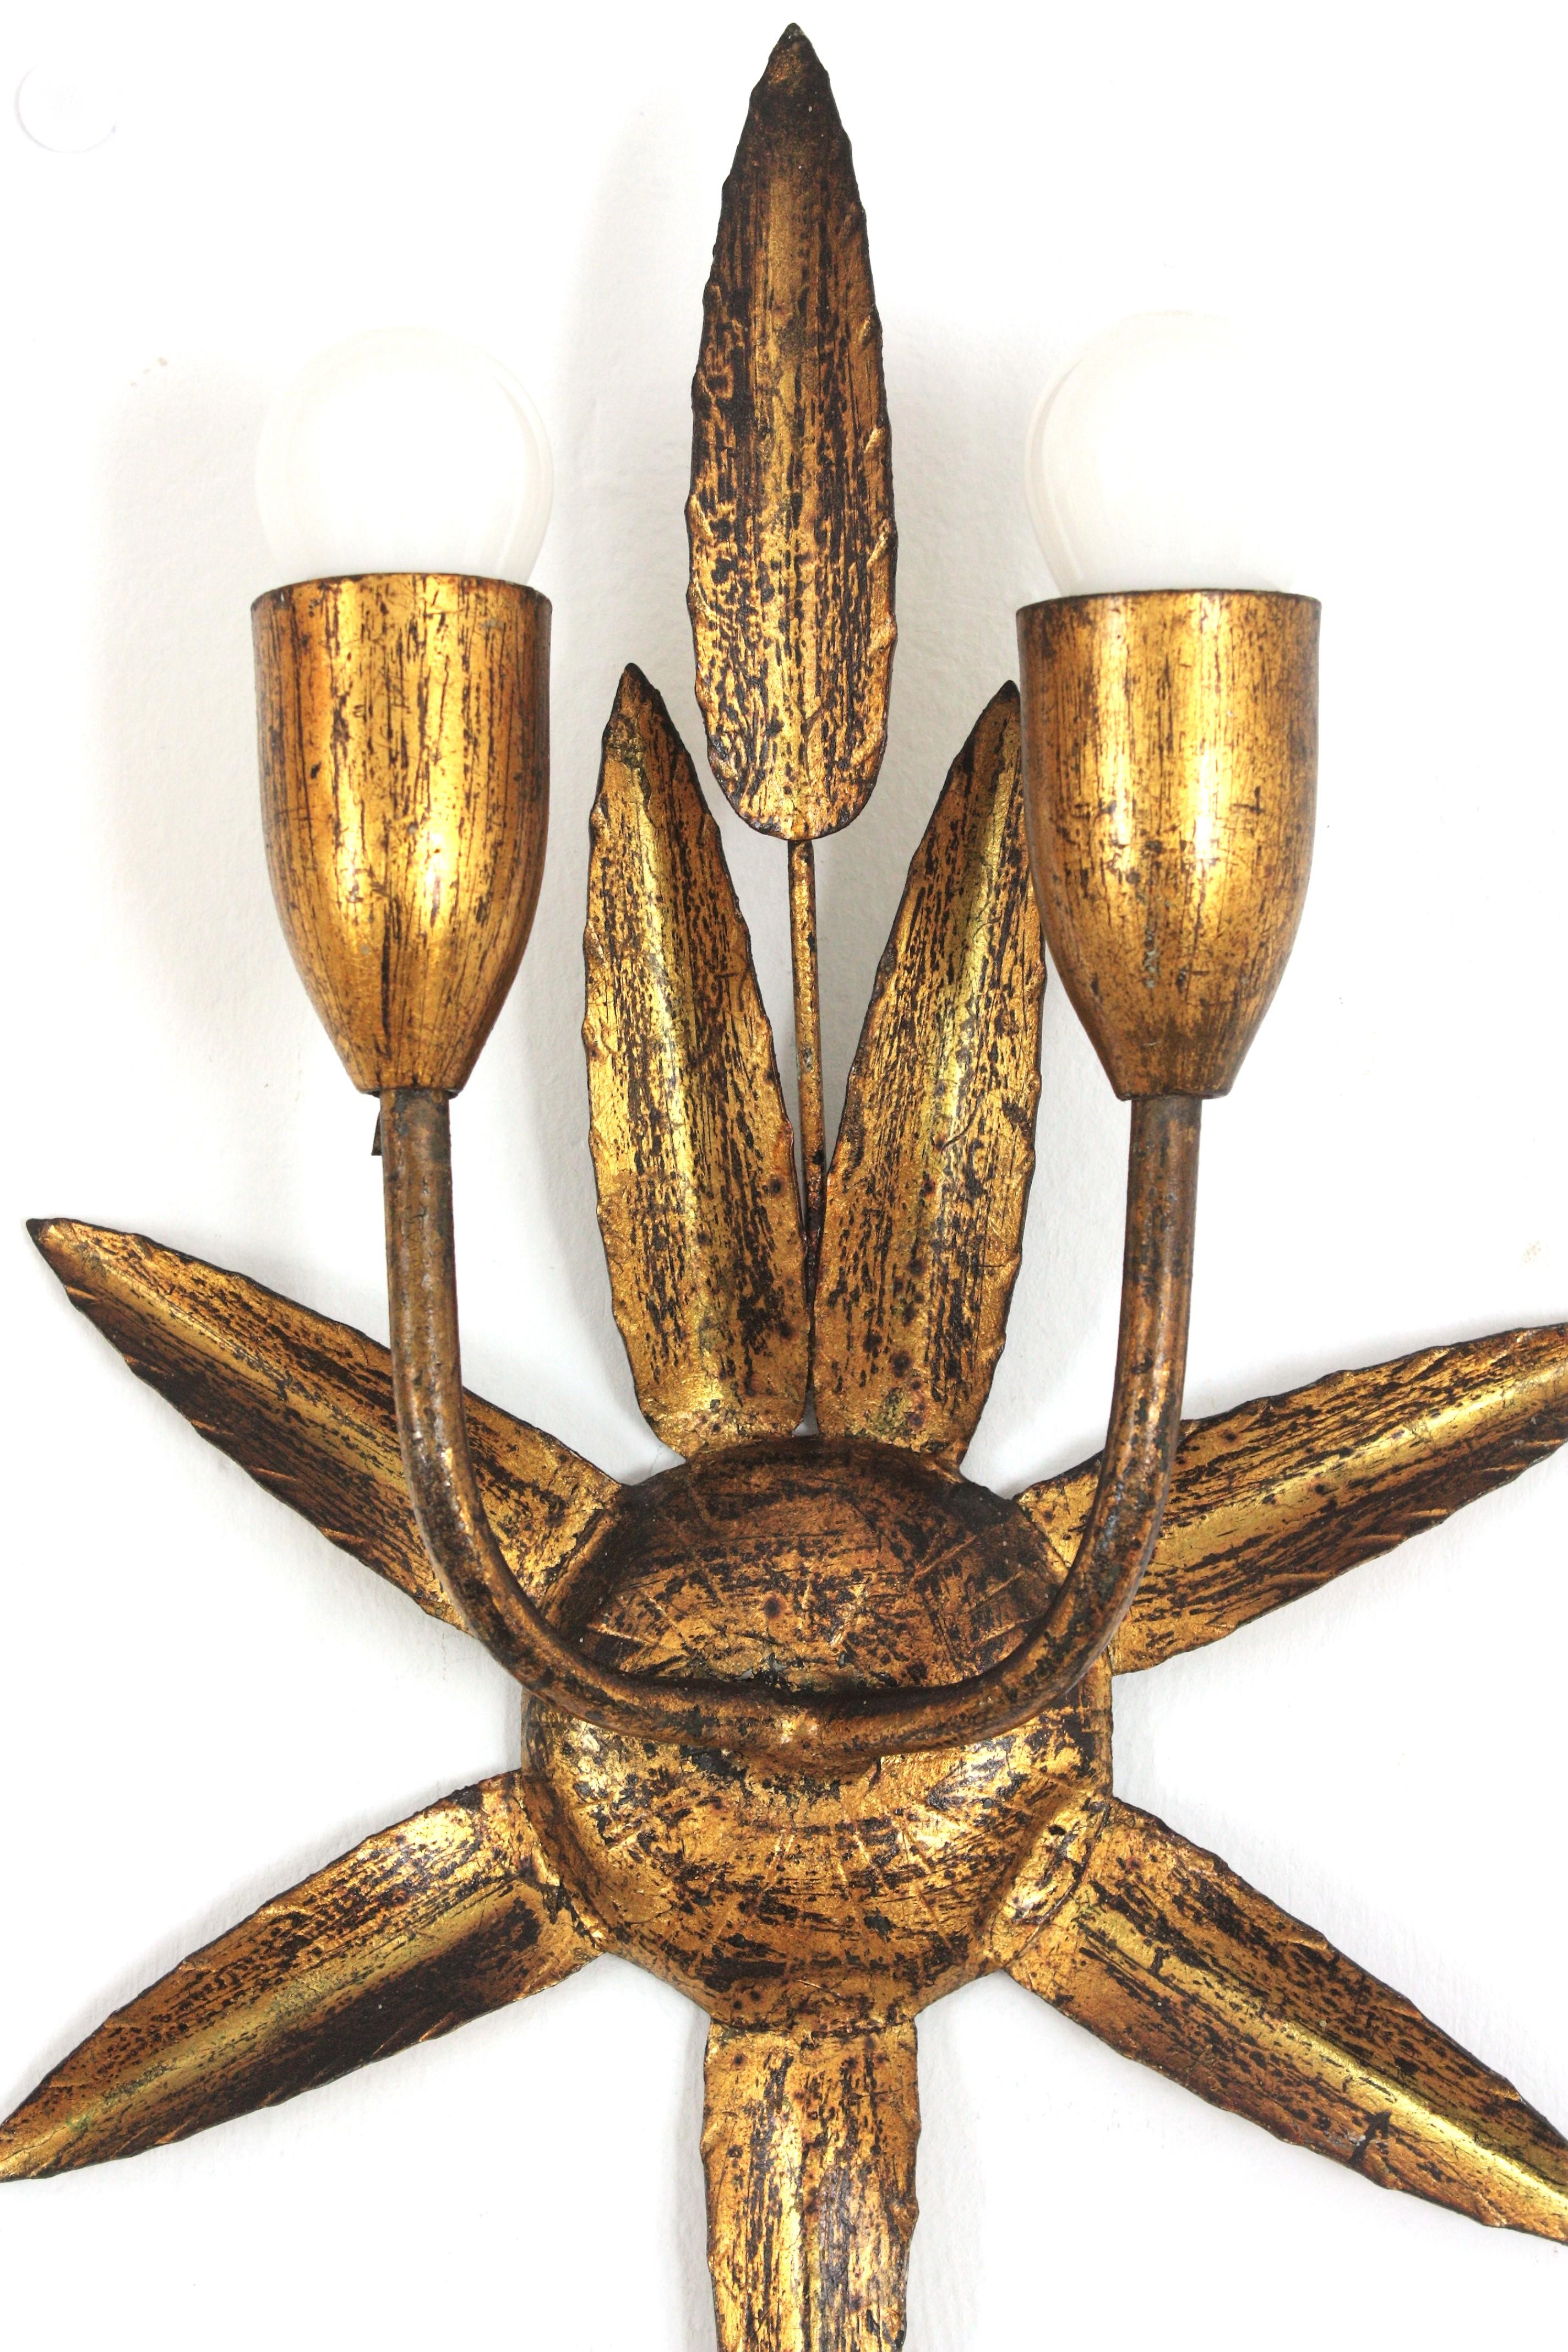 Hollywood Regency Spanish Gilt Iron Wall Sconce with Foliage Design and Starburst Backplate, 1950s For Sale